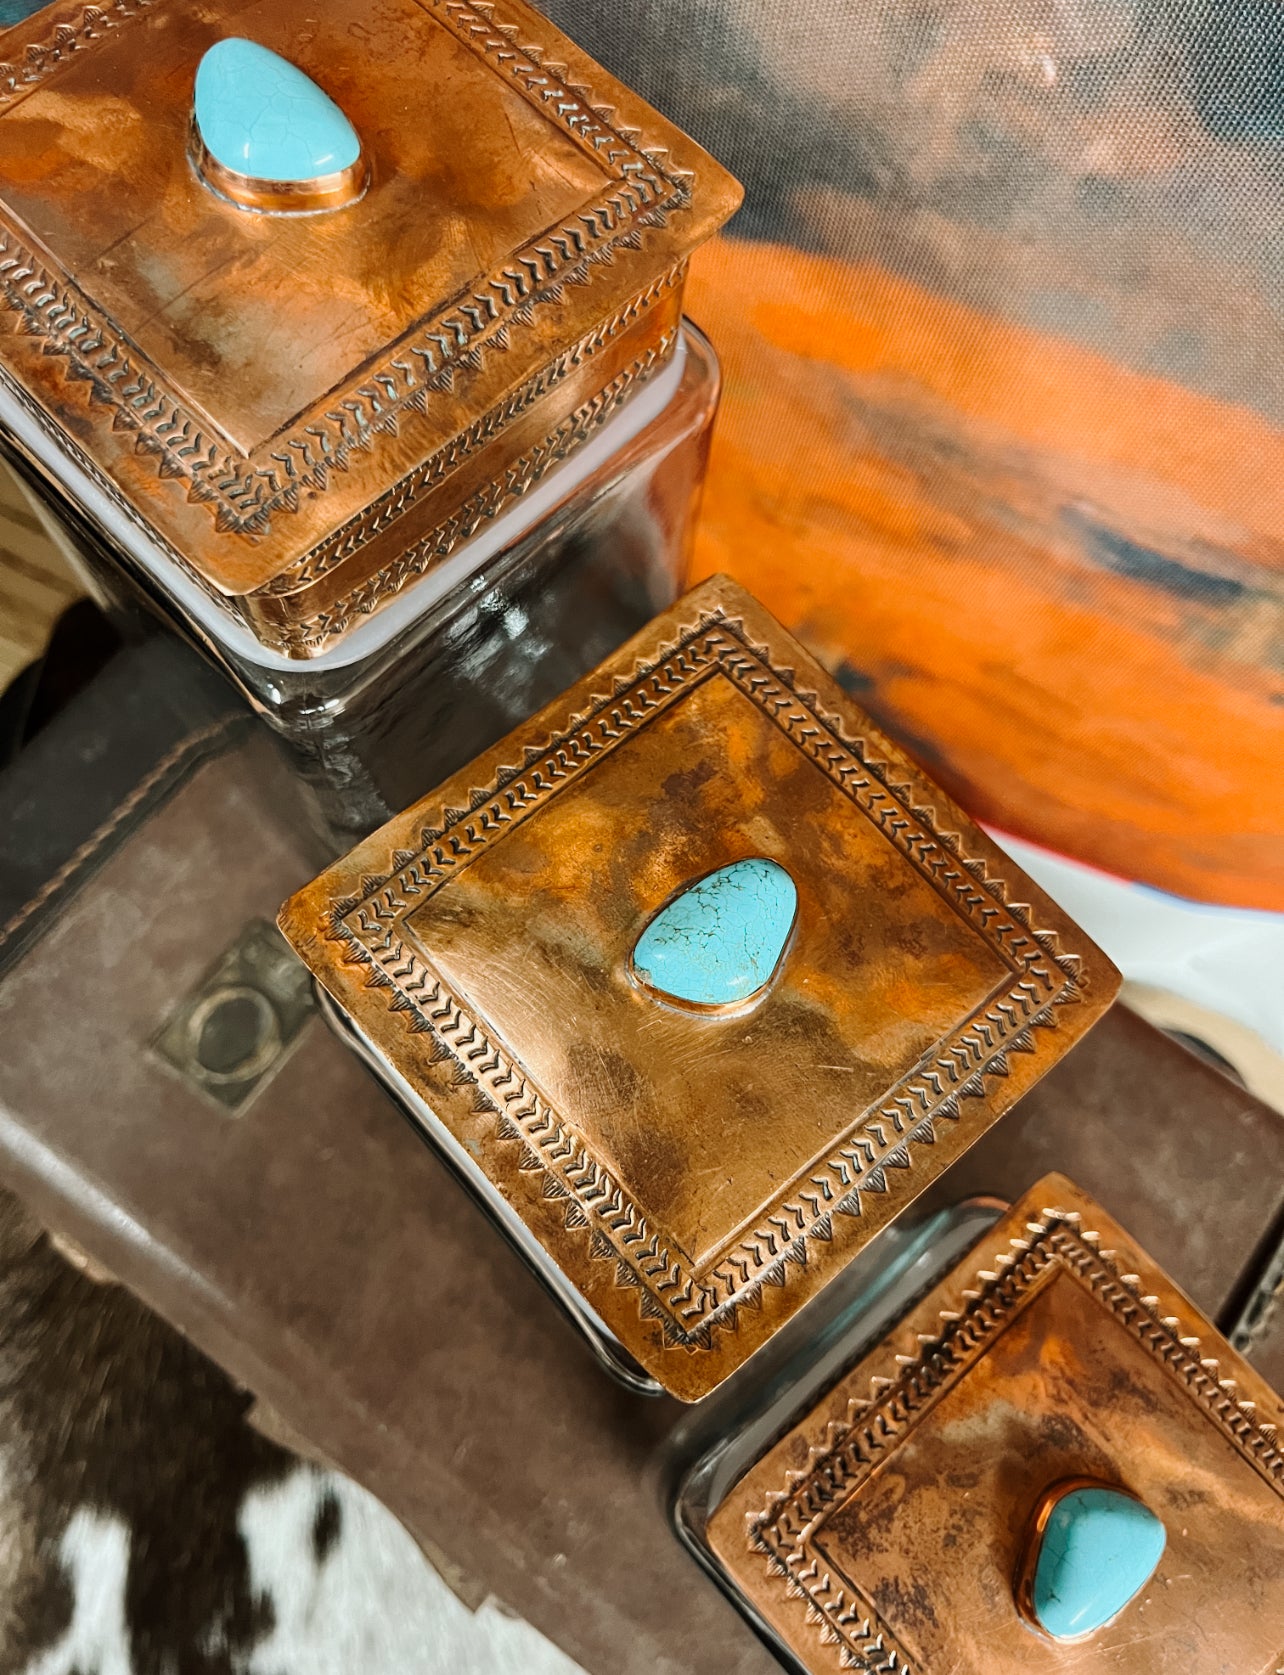 The Stamped Copper and Turquoise Canisters